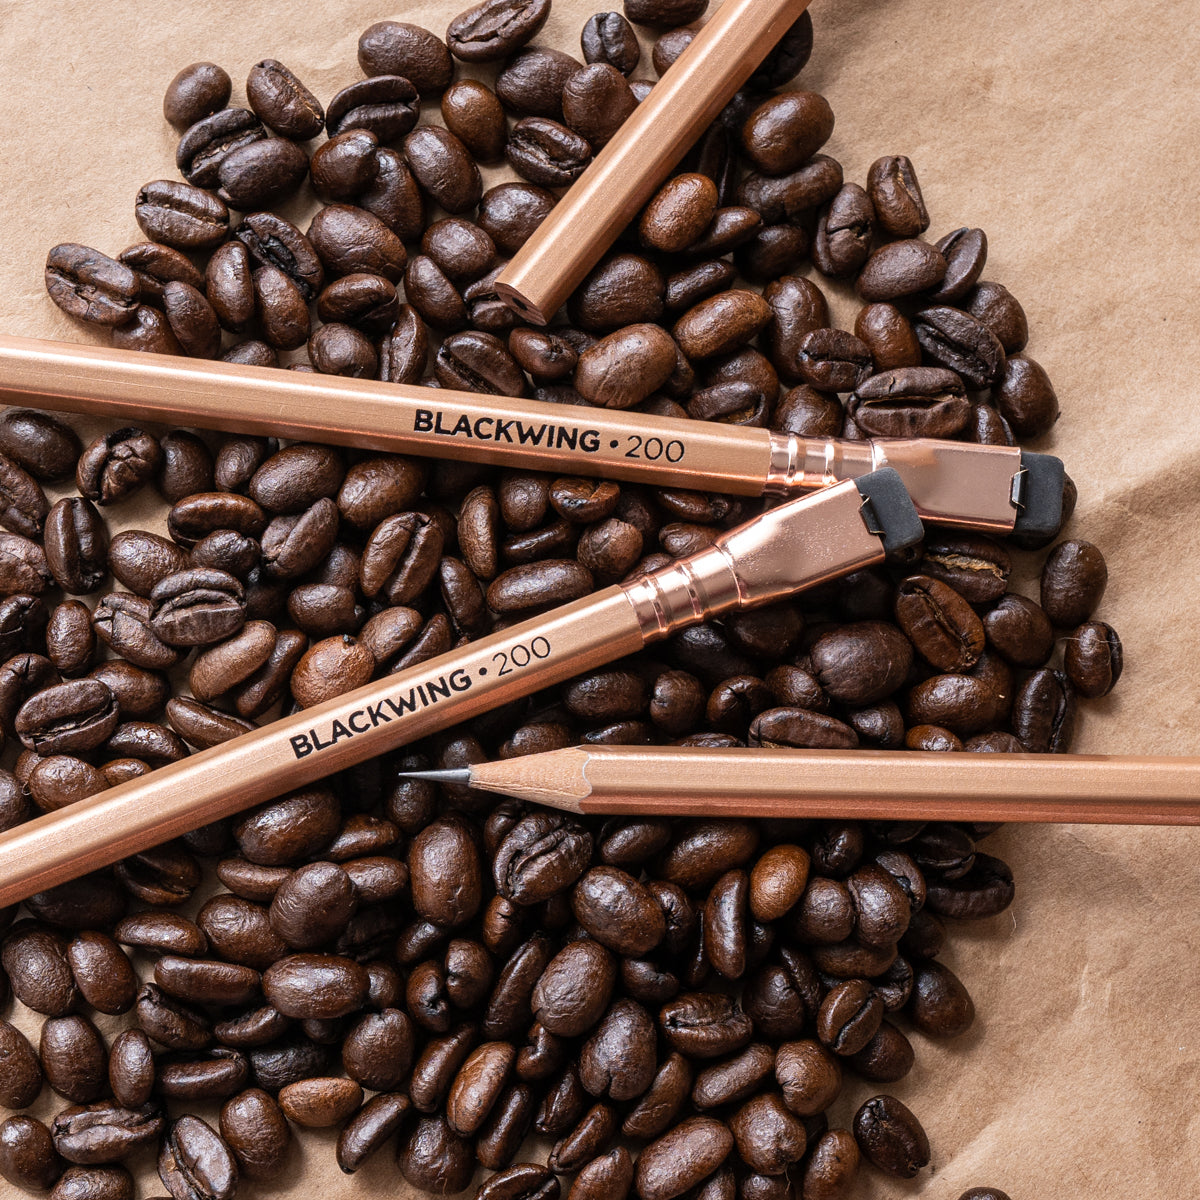 Blackwing Volume 200 - A Tribute to Coffeehouses like Caffè Lena - (12 Pack) - Made in Japan